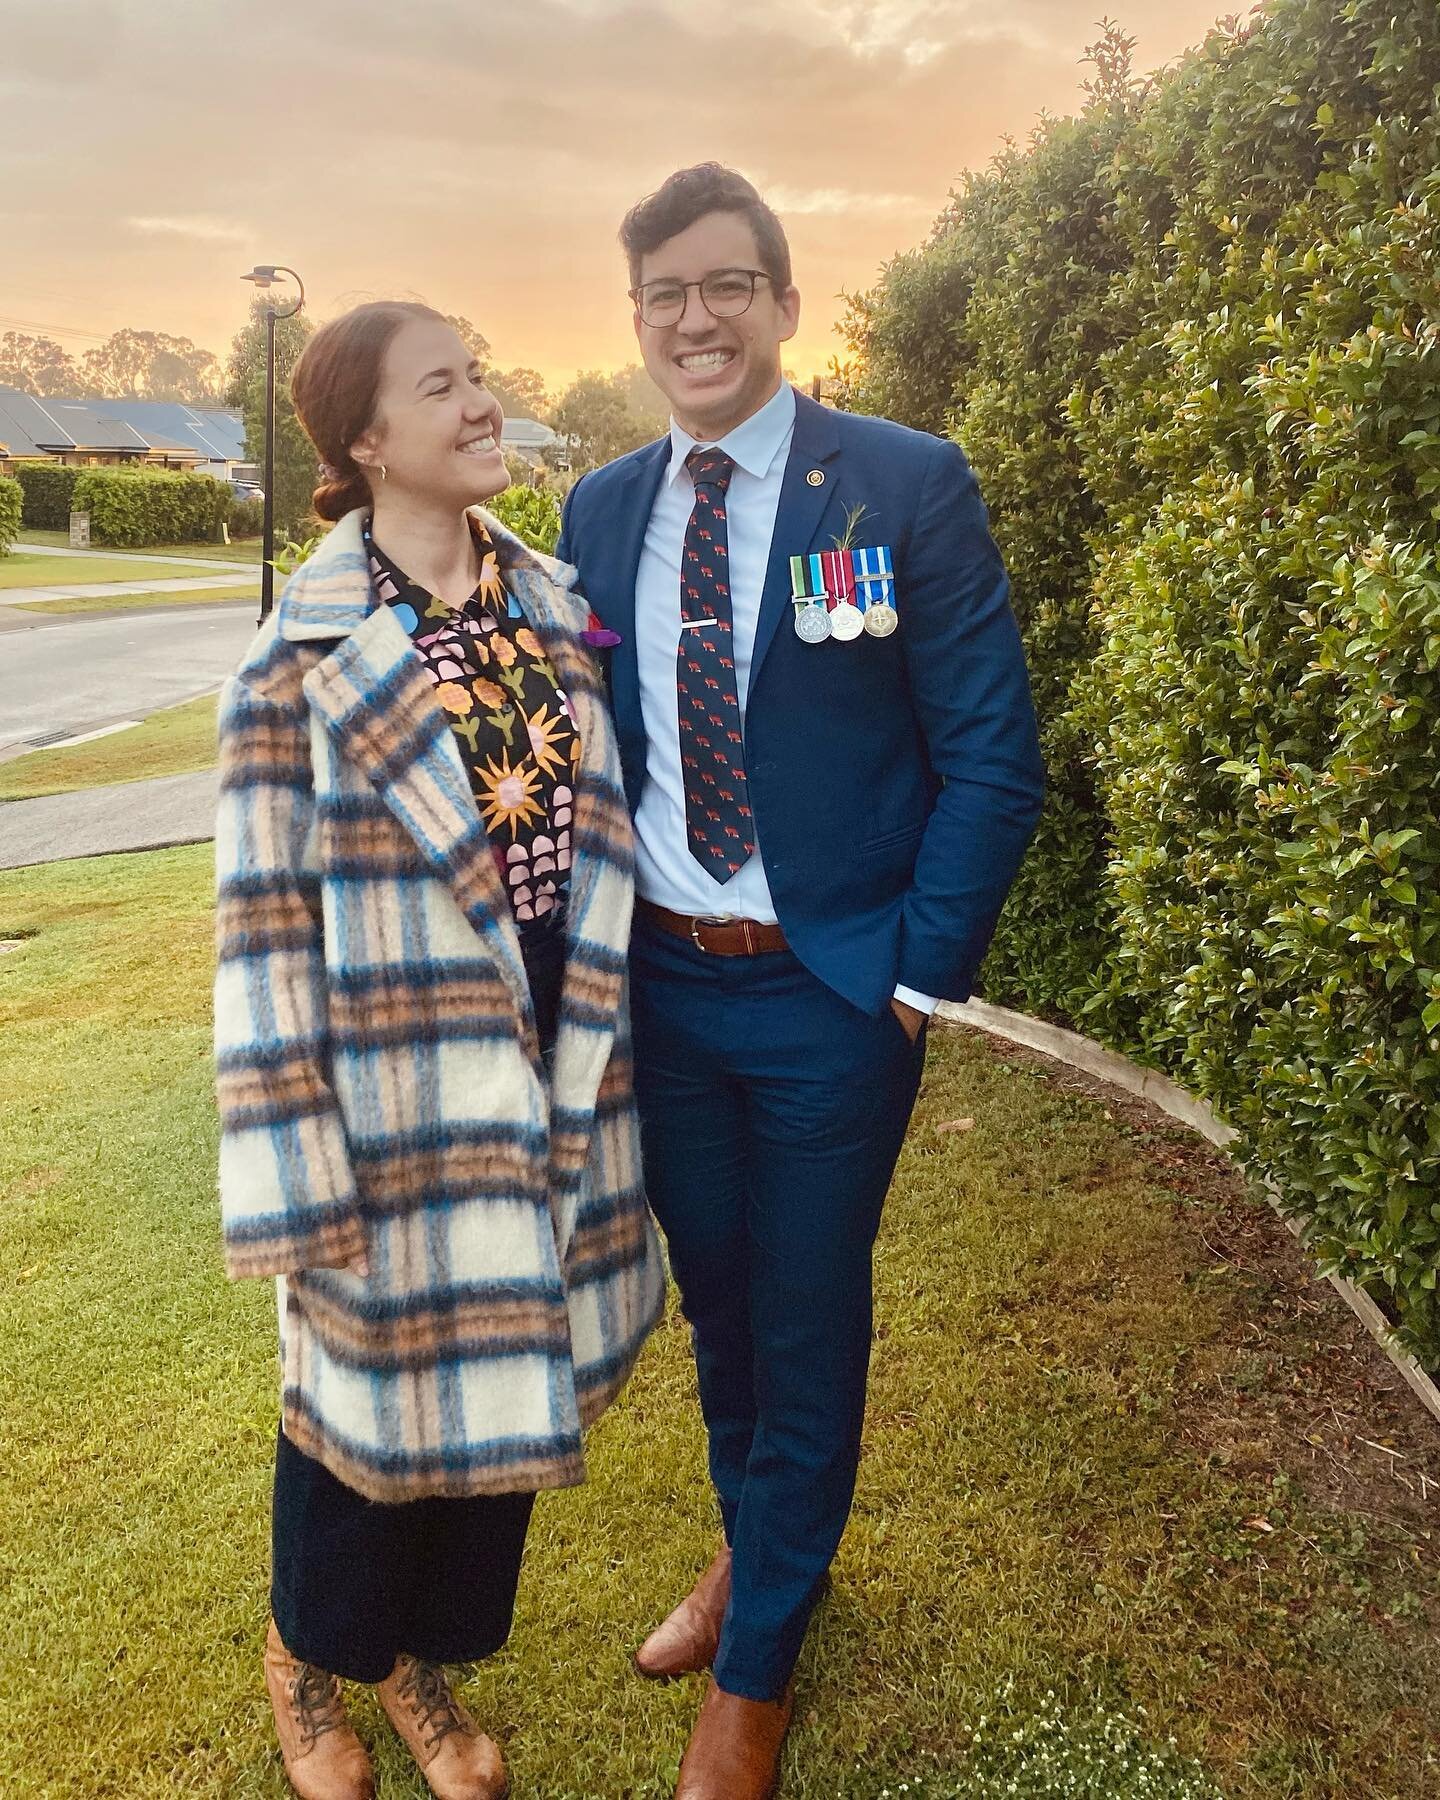 ANZAC Day &lsquo;23 
A day to acknowledge, pay respects and give thanks to our veterans and serving members. Your sacrifices are seen and greatly appreciated.
A very special mention to my amazing partner Aaron- 13 years serving (and counting) who has